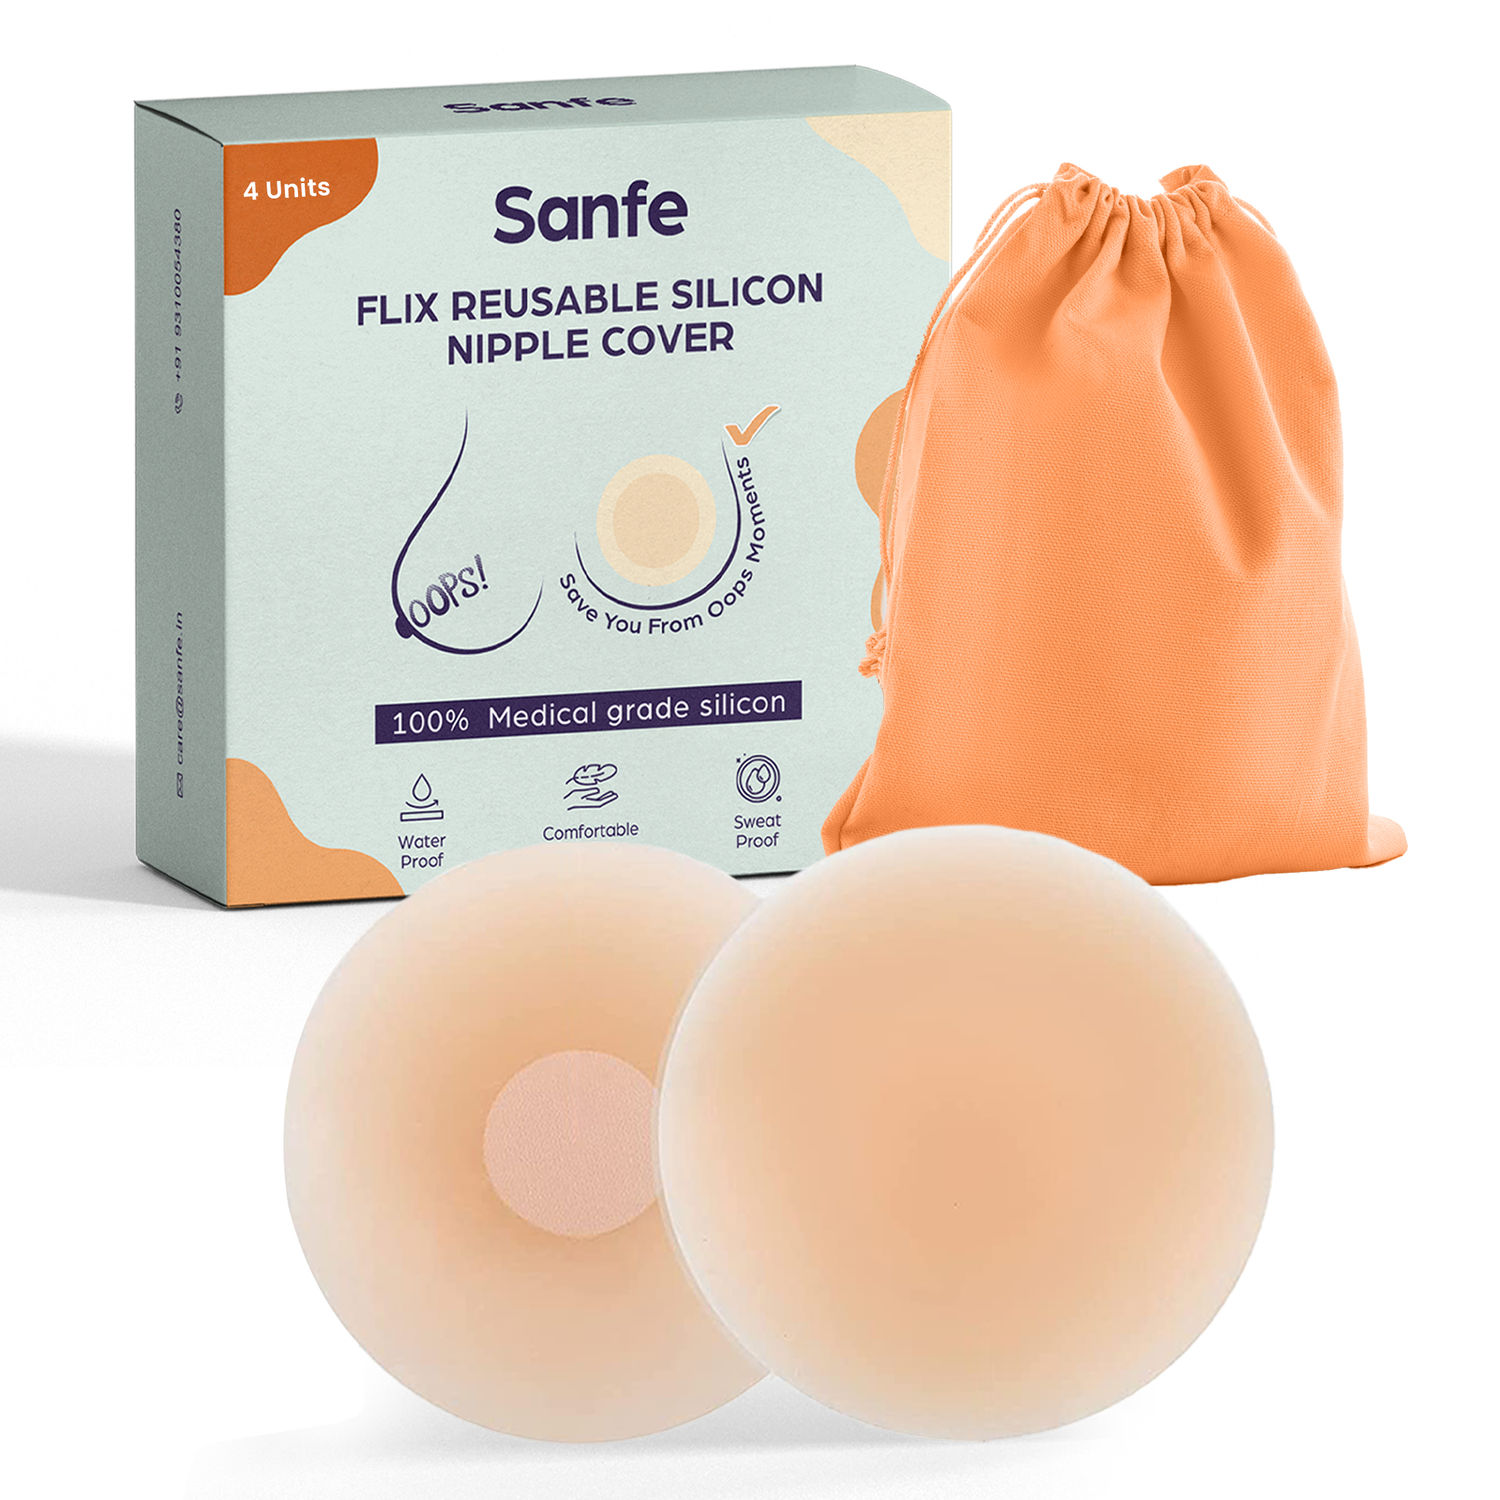 https://media6.ppl-media.com//tr:h-750,w-750,c-at_max,dpr-2/static/img/product/348019/sanfe-flix-reusable-silicone-nipple-cover-10-times-reusable-skin-friendly-adhesive-medical-grade-silicone-4-pieces_1_display_1678253145_6cc2b678.jpg